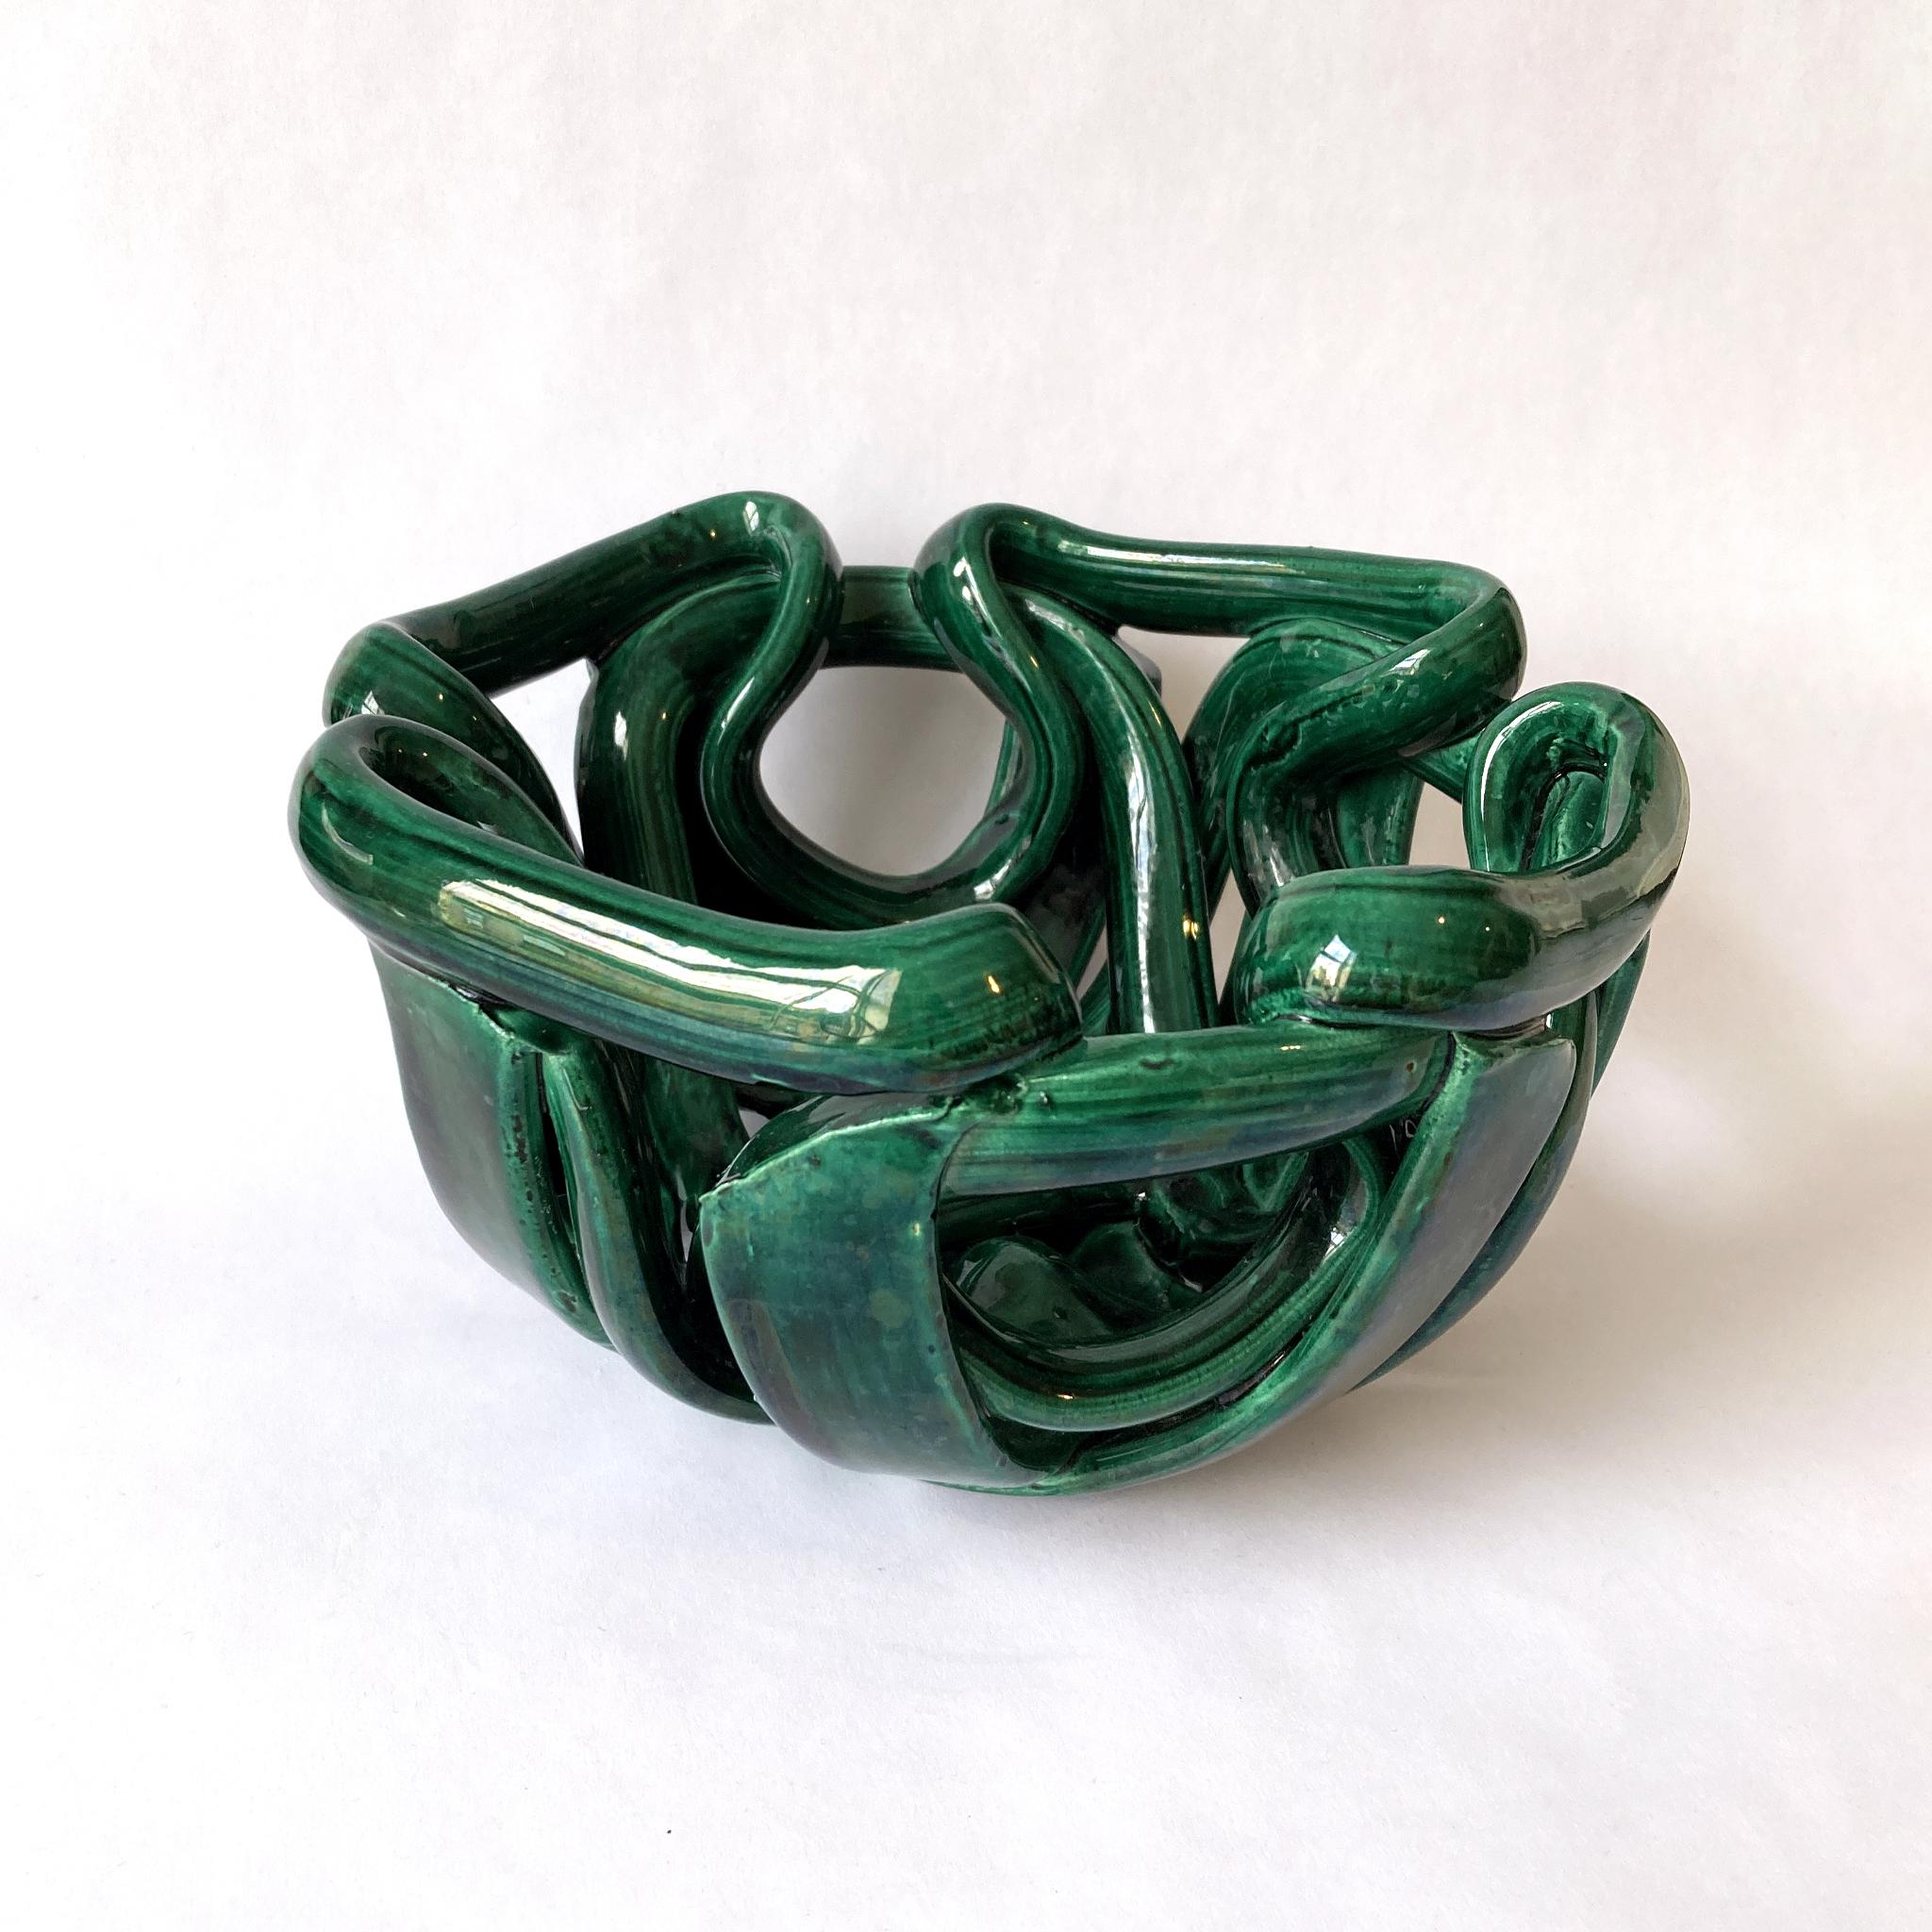 Hand-Crafted Green Braided Woven Abstract Ceramic Centerpiece Bowl